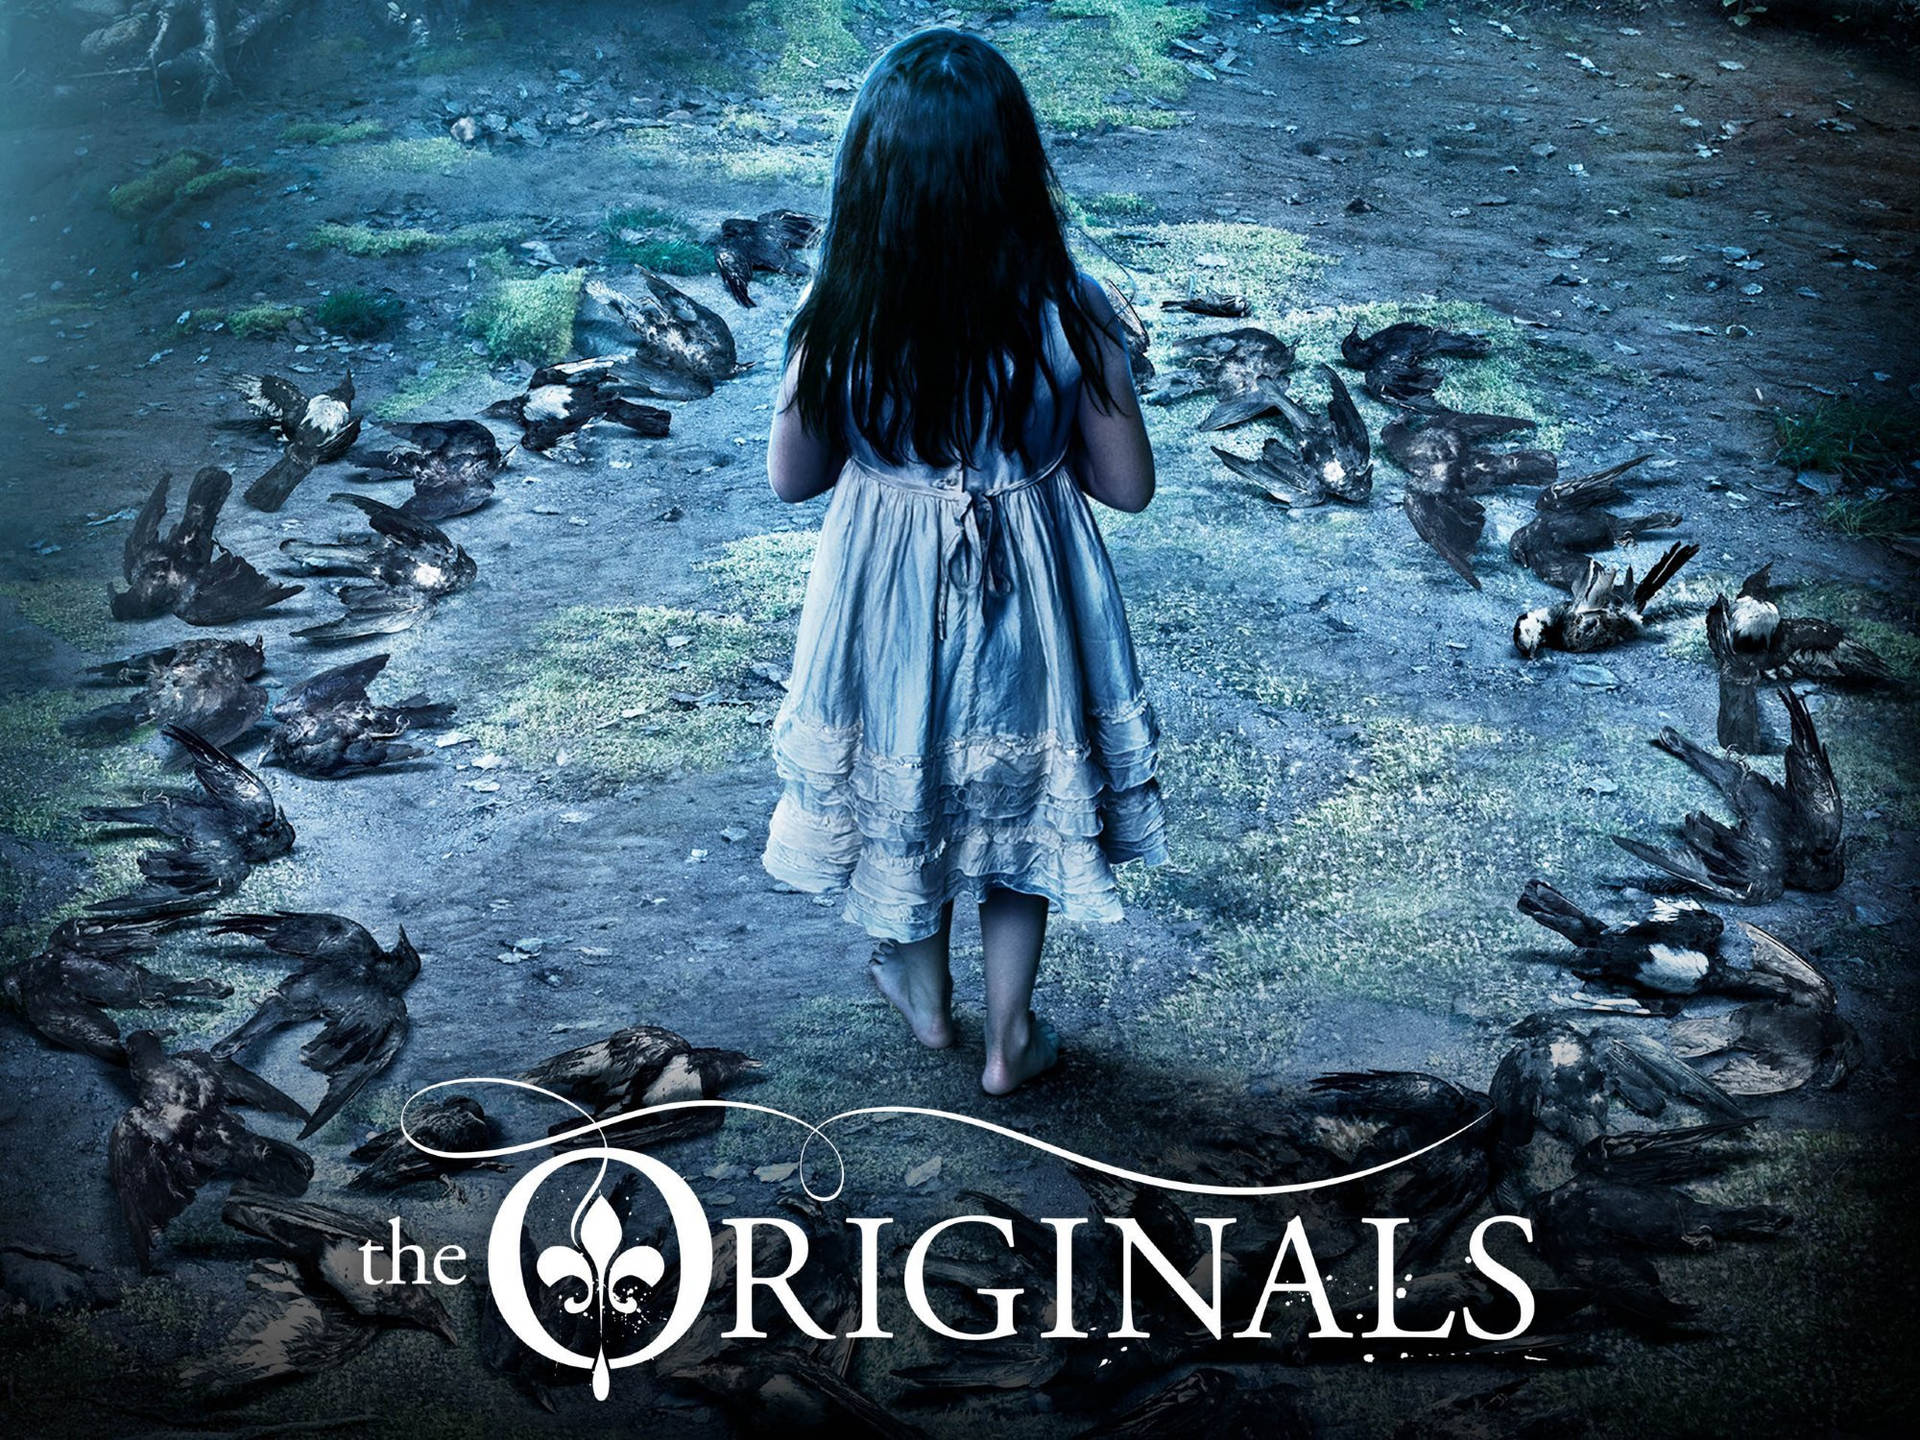 The Originals Young Girl Cover Wallpaper